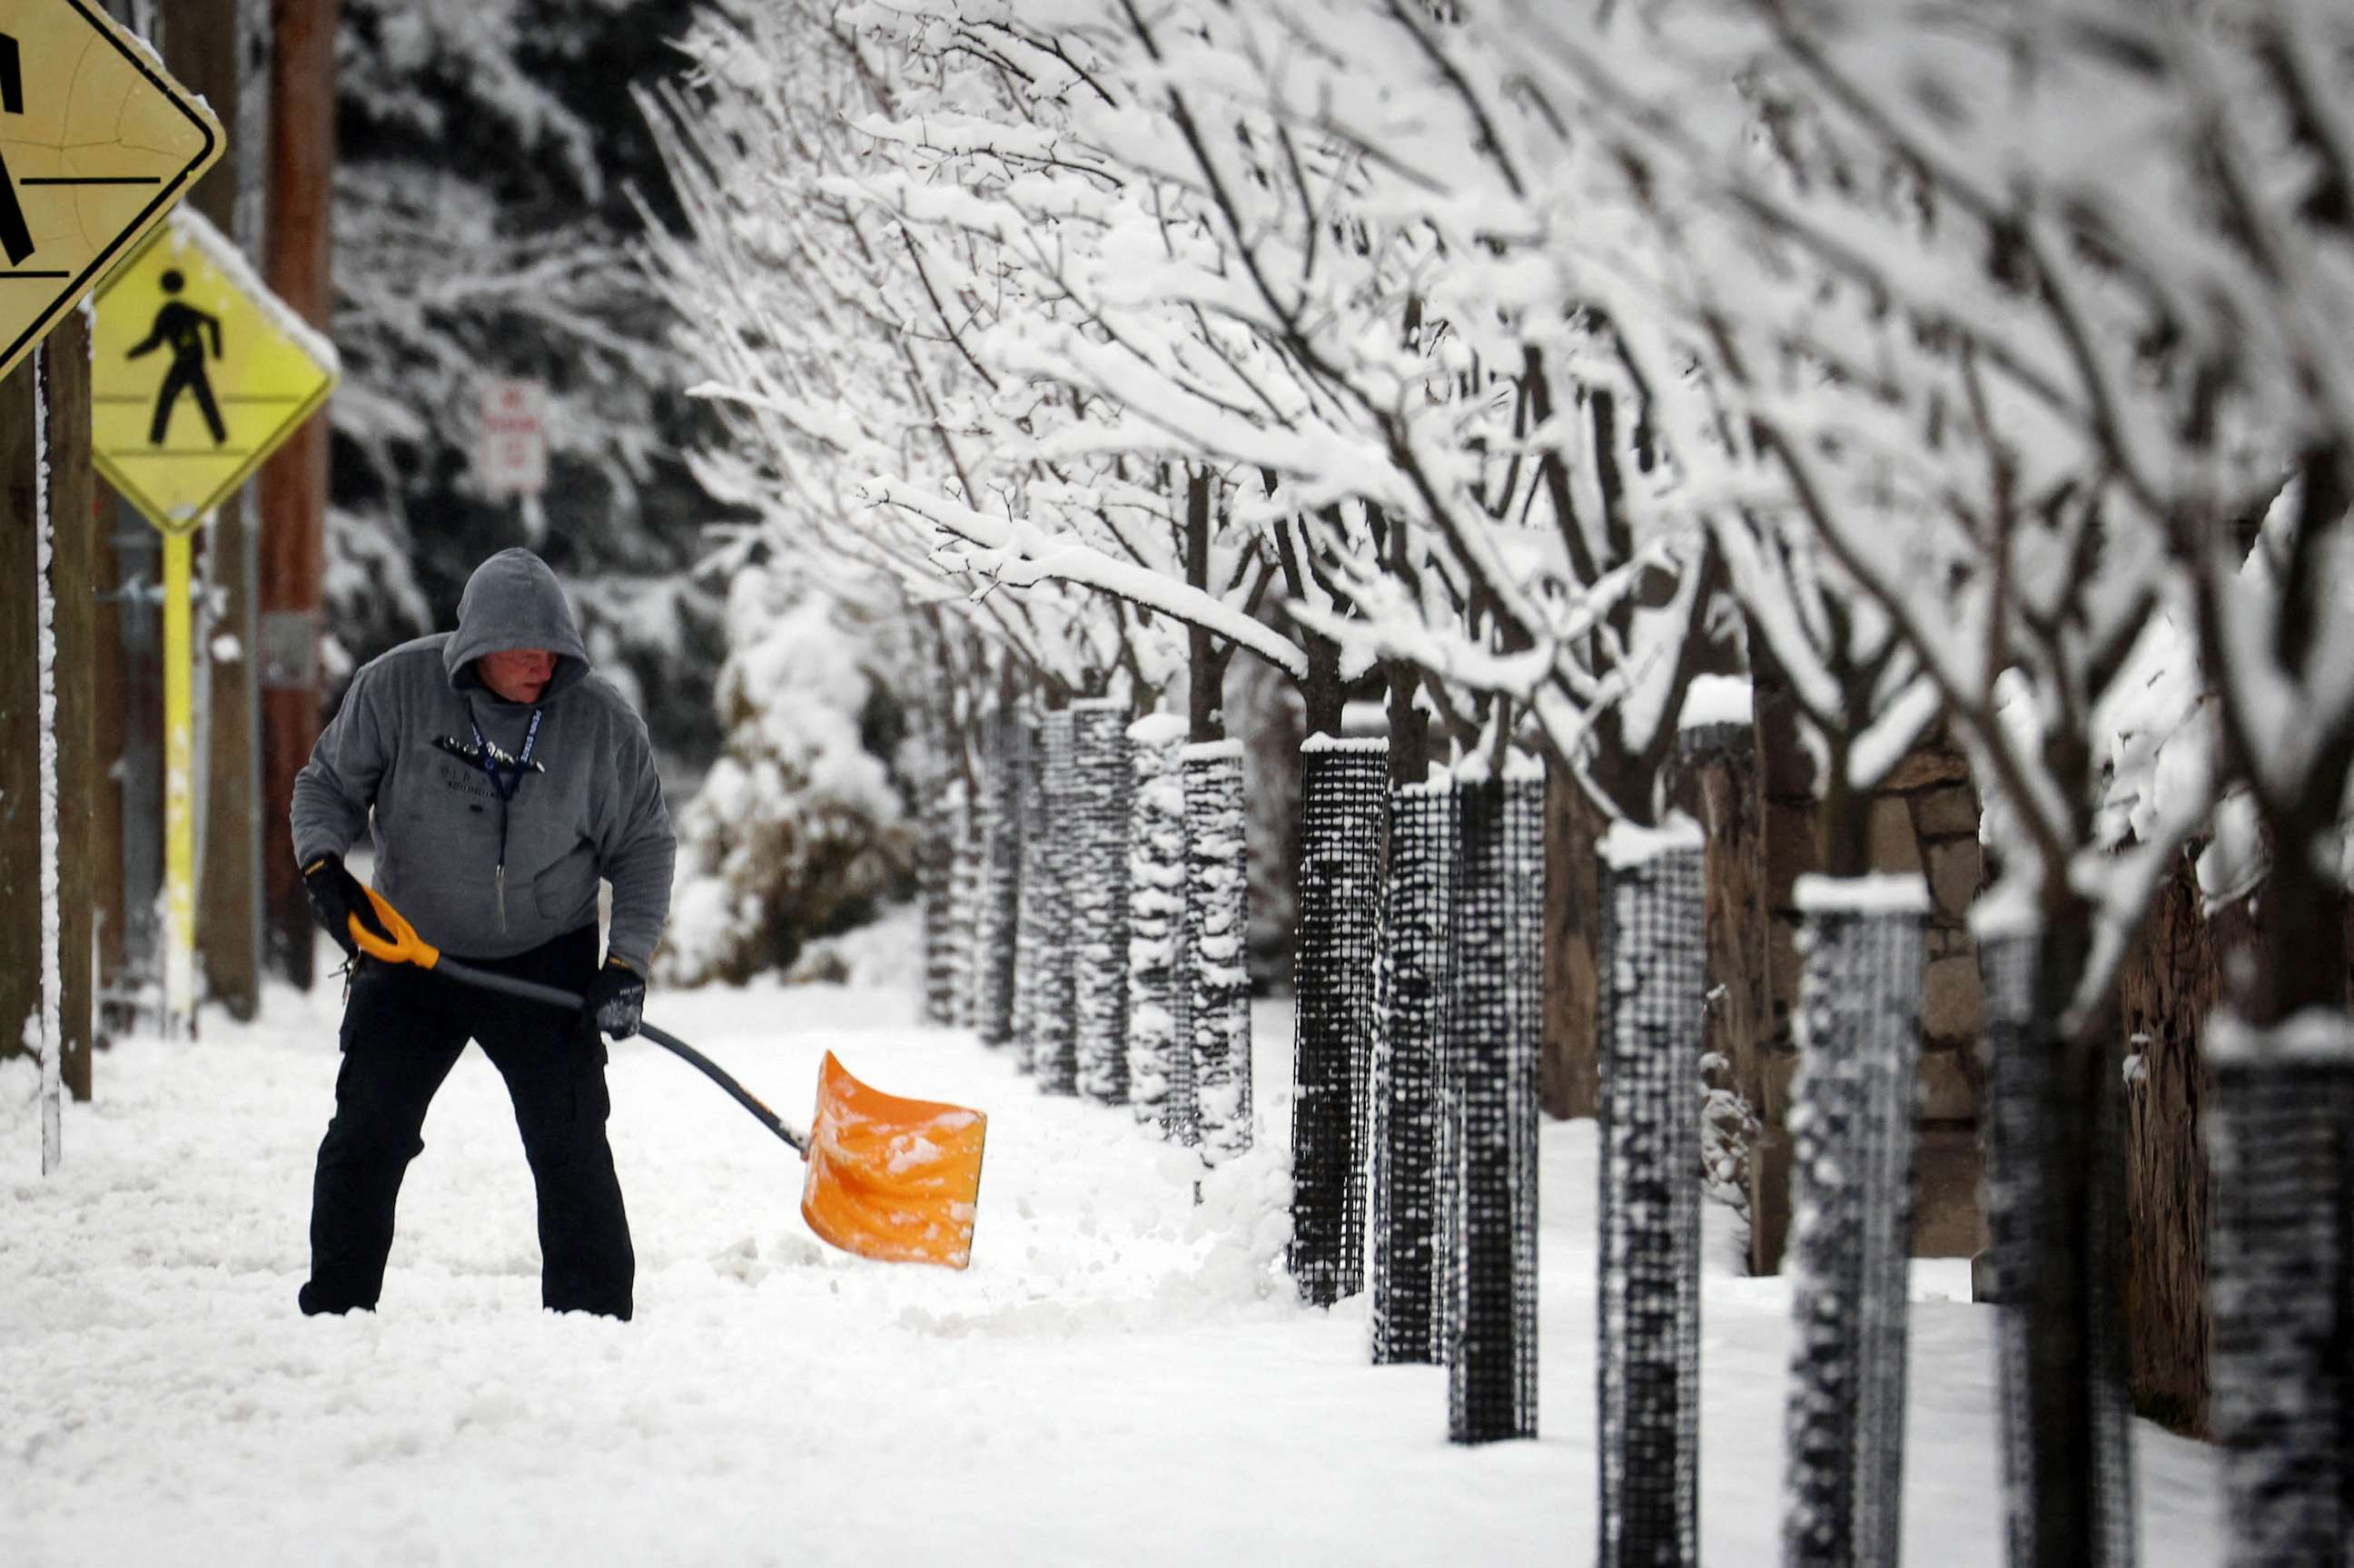 PHOTO: A man shovels snow during a winter storm in the New York City suburban Village of Upper Nyack, New York, Feb. 28, 2023.